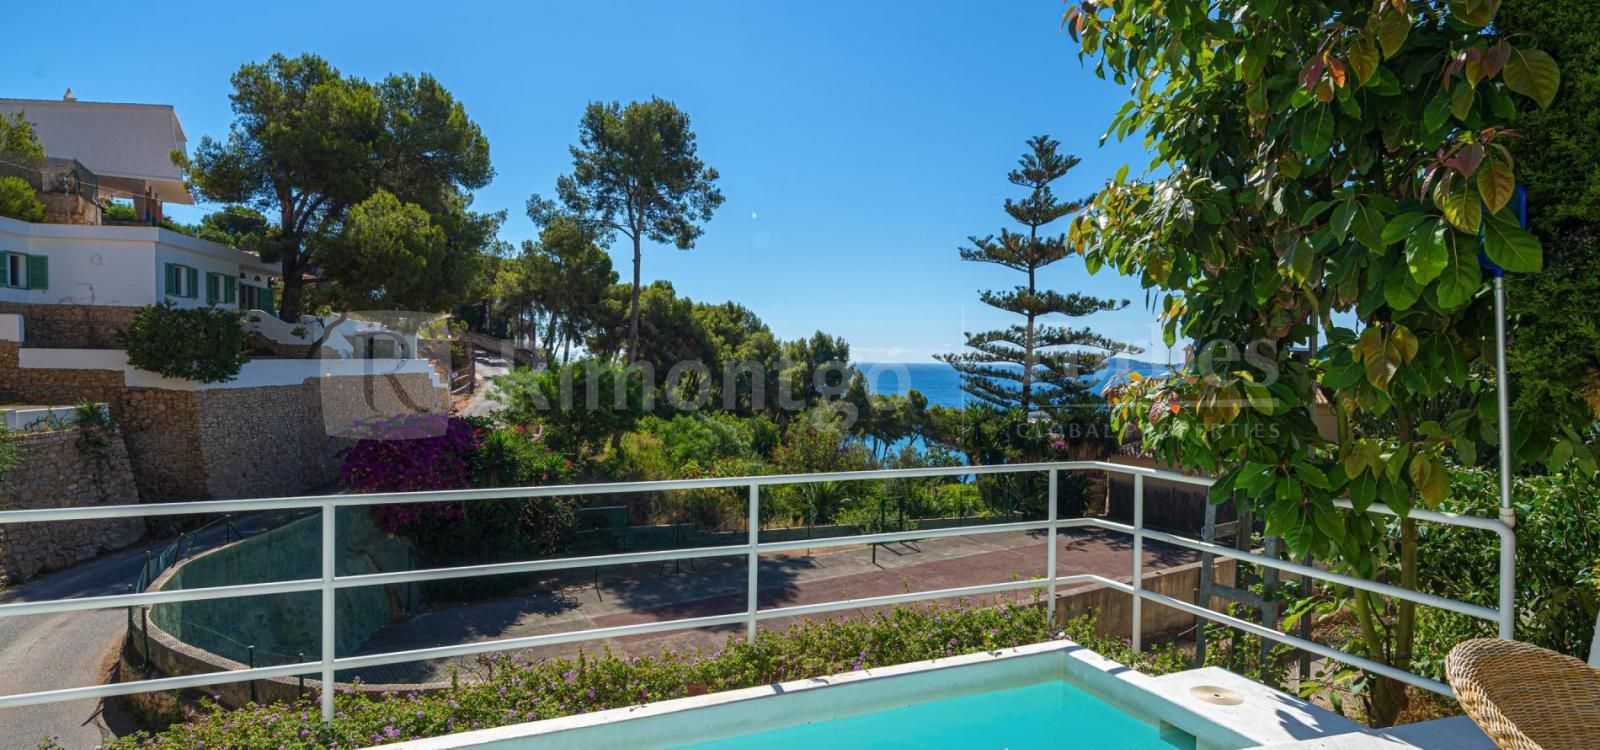 Ibiza-style property, renovated with the utmost of style. An idyllic place to enjoy the coastal lifestyle, located only a few metres from the sea in Javea, Alicante.